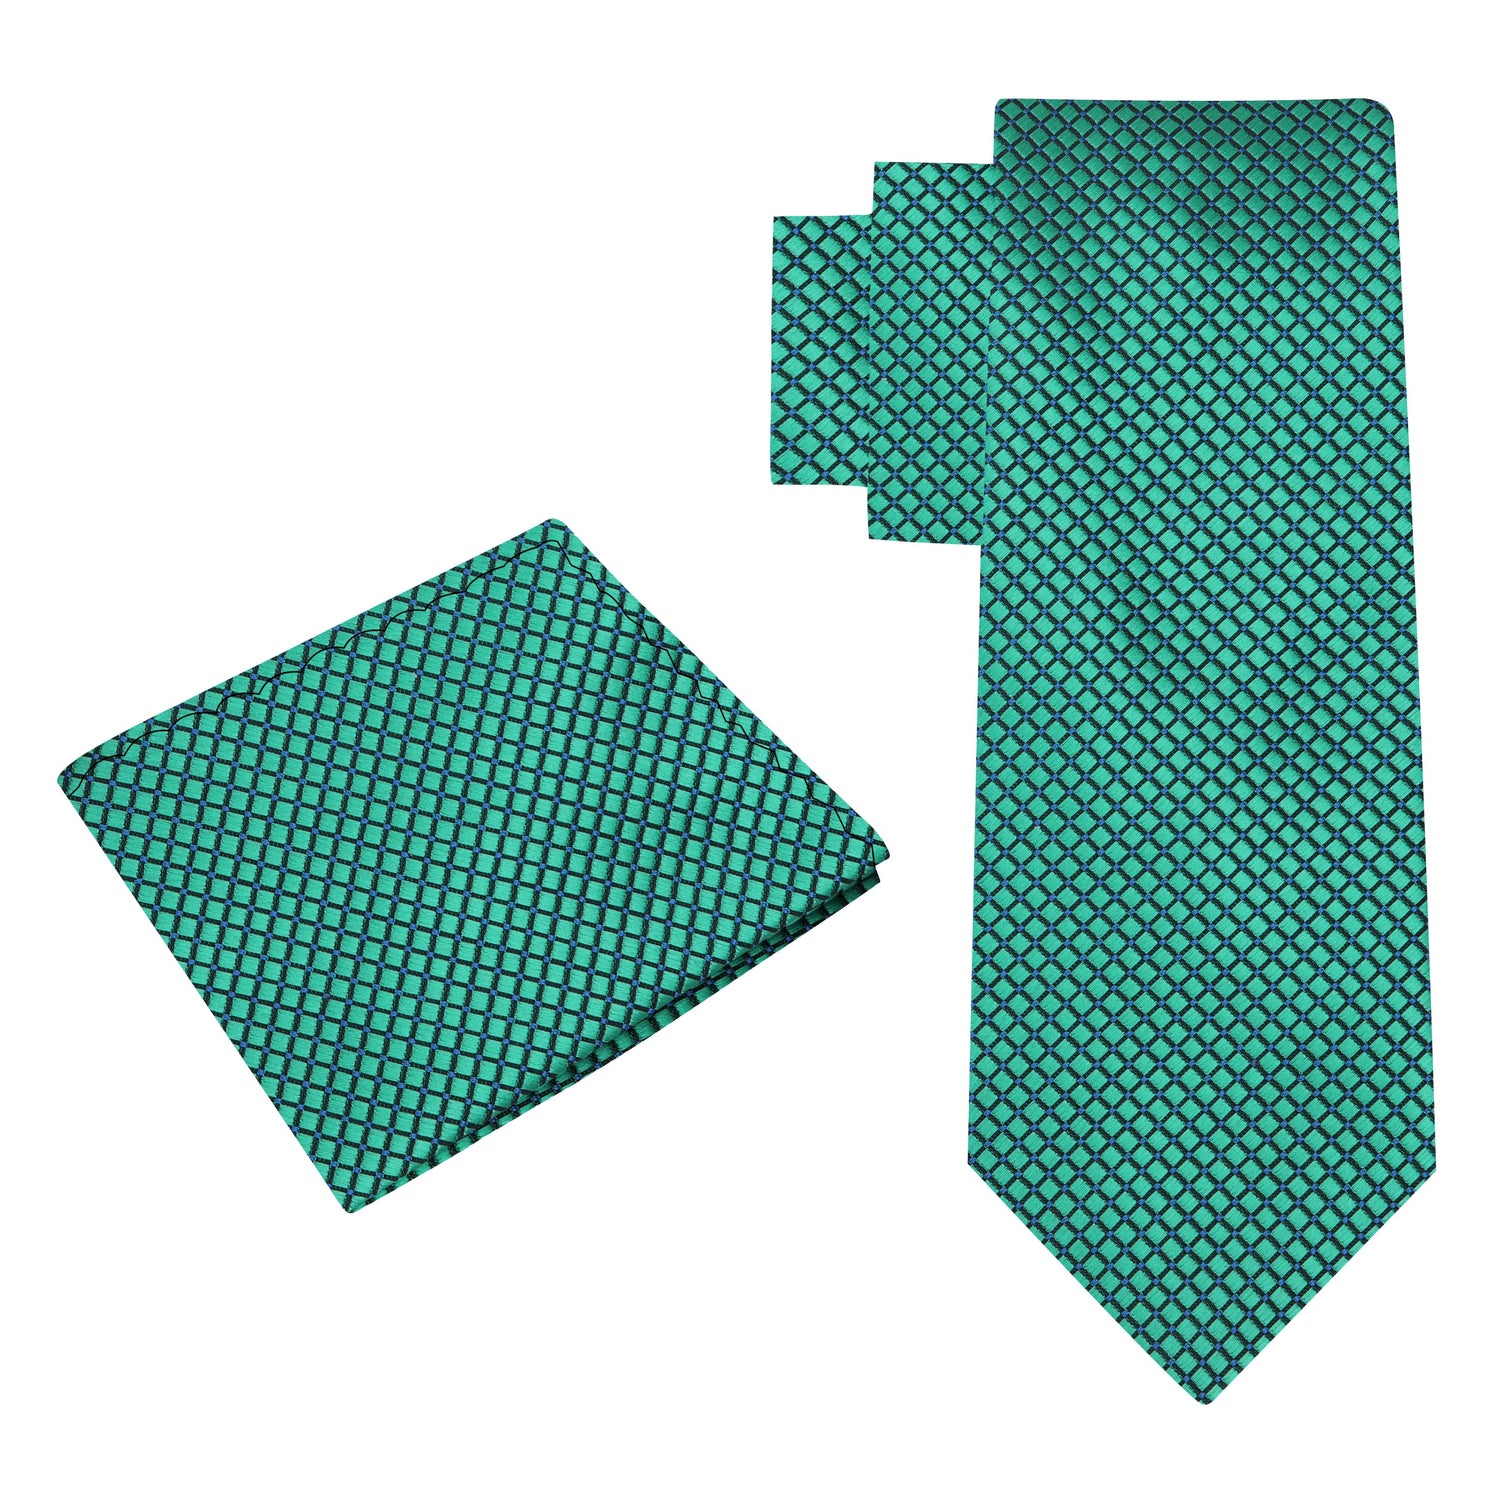 View 2 Green Geometric Tie and Square